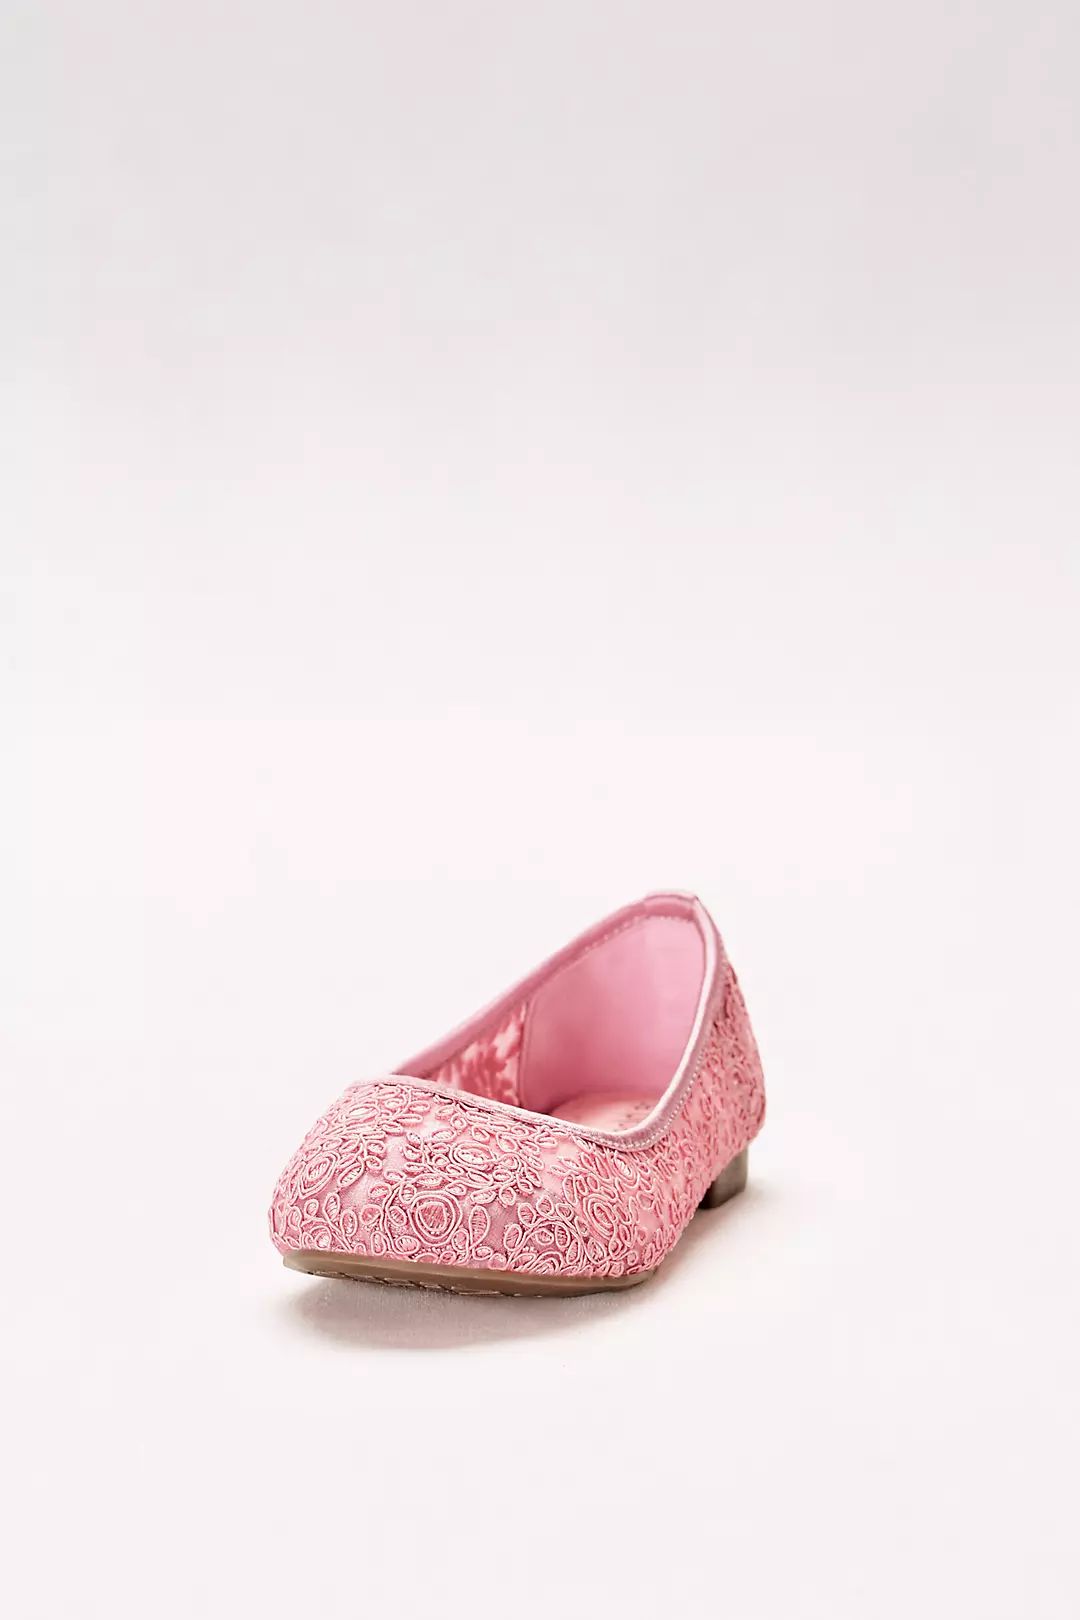 Girls Corded Lace Ballet Flats Image